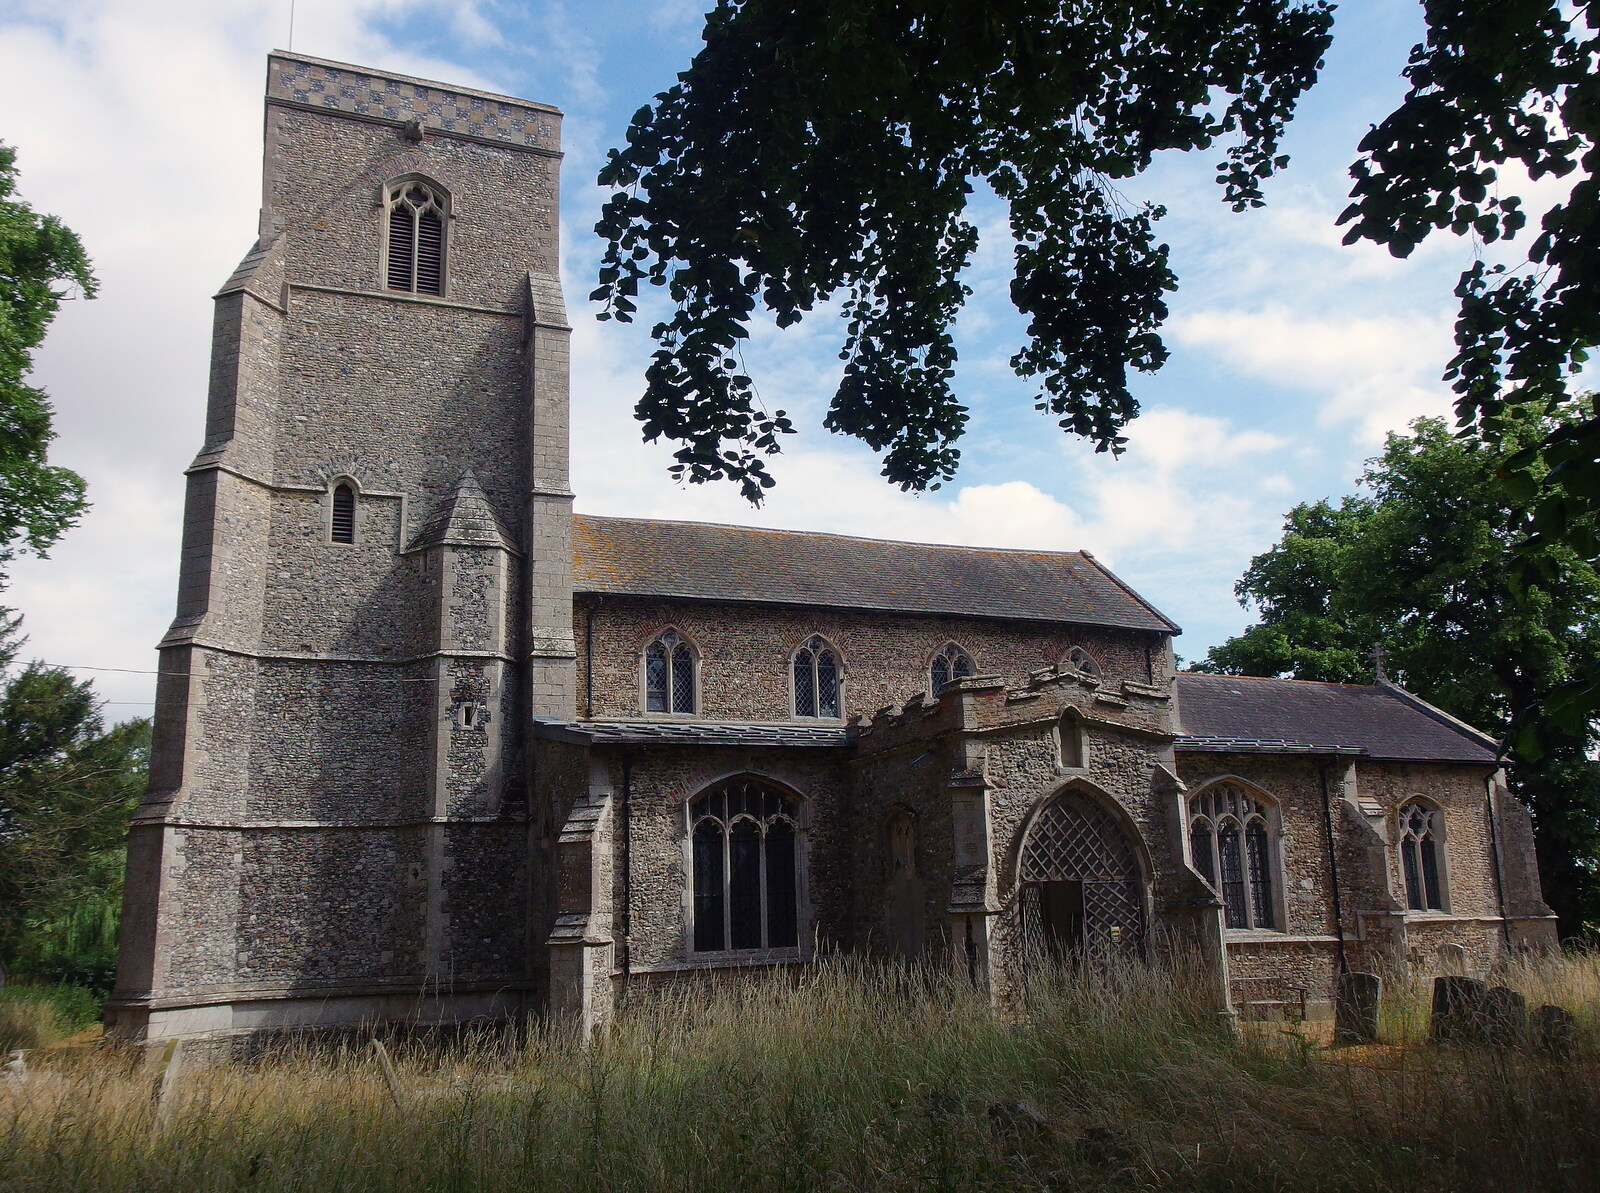 The church of St. Margaret in Westhorpe from A Ride to Walsham Le Willows, Suffolk - 15th July 2022